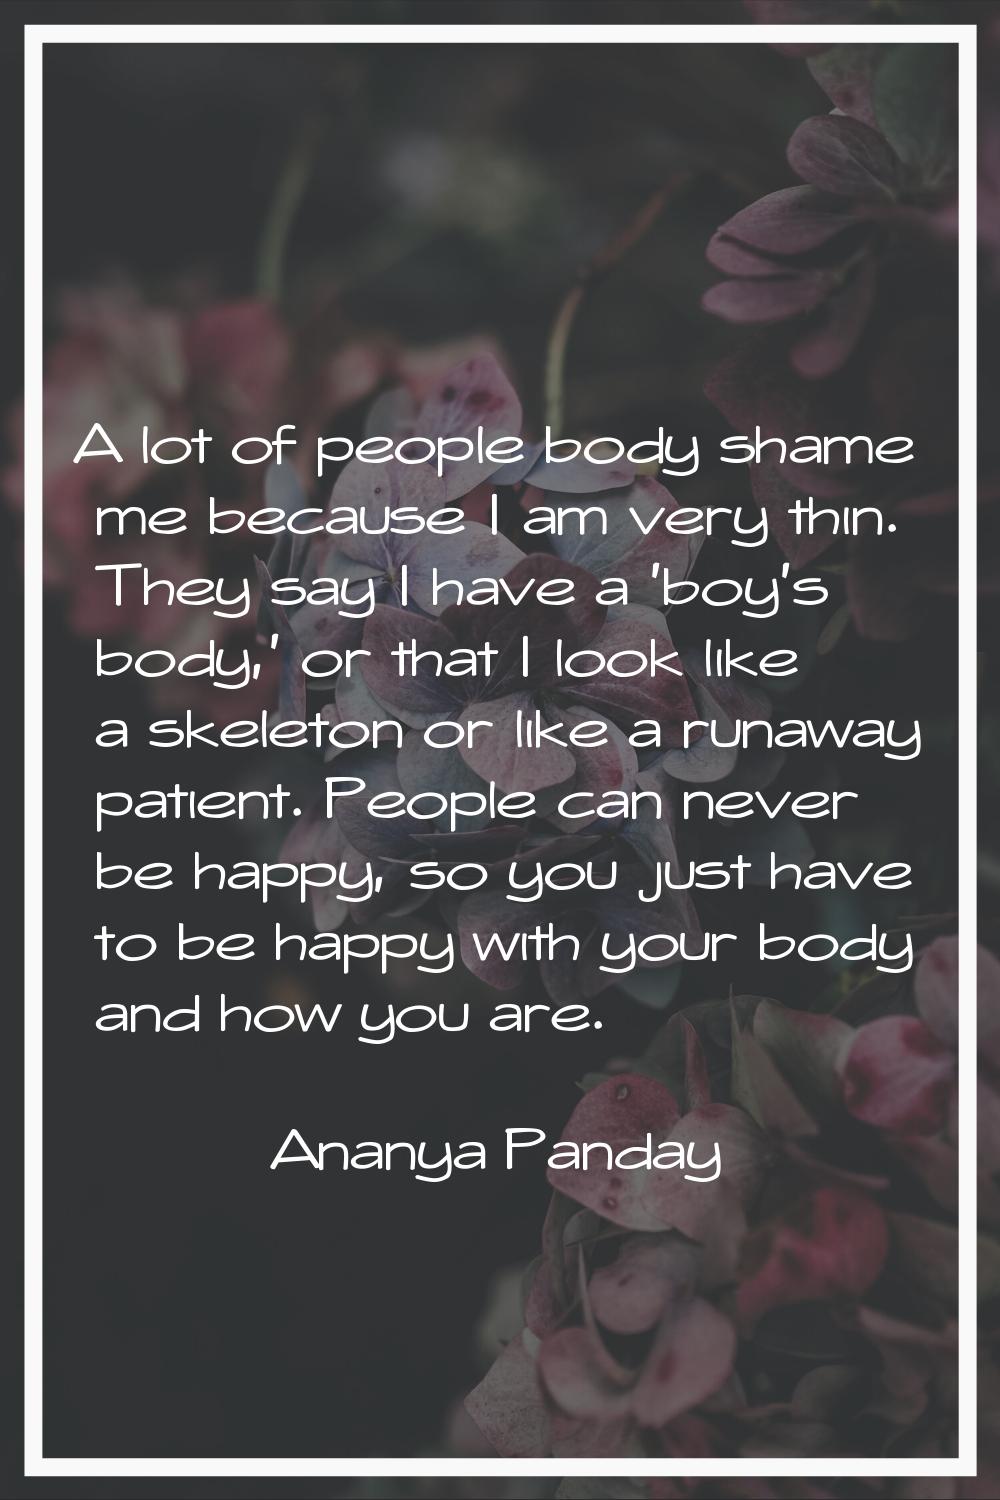 A lot of people body shame me because I am very thin. They say I have a 'boy's body,' or that I loo